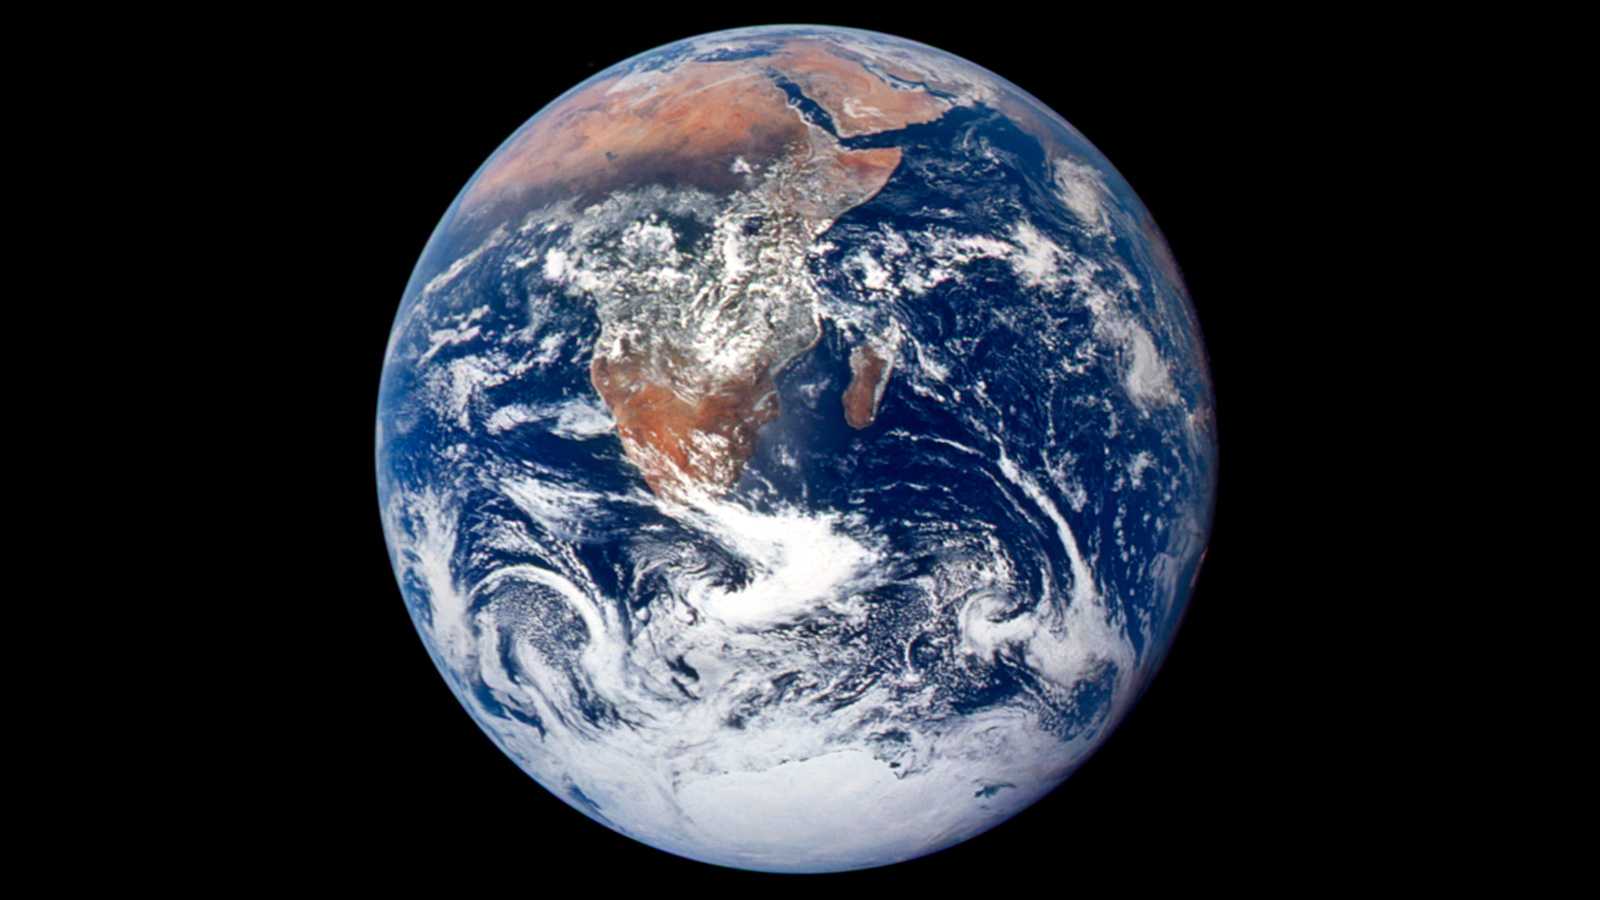 The 'Blue Marble': One of Earth's most iconic images, 50 years on